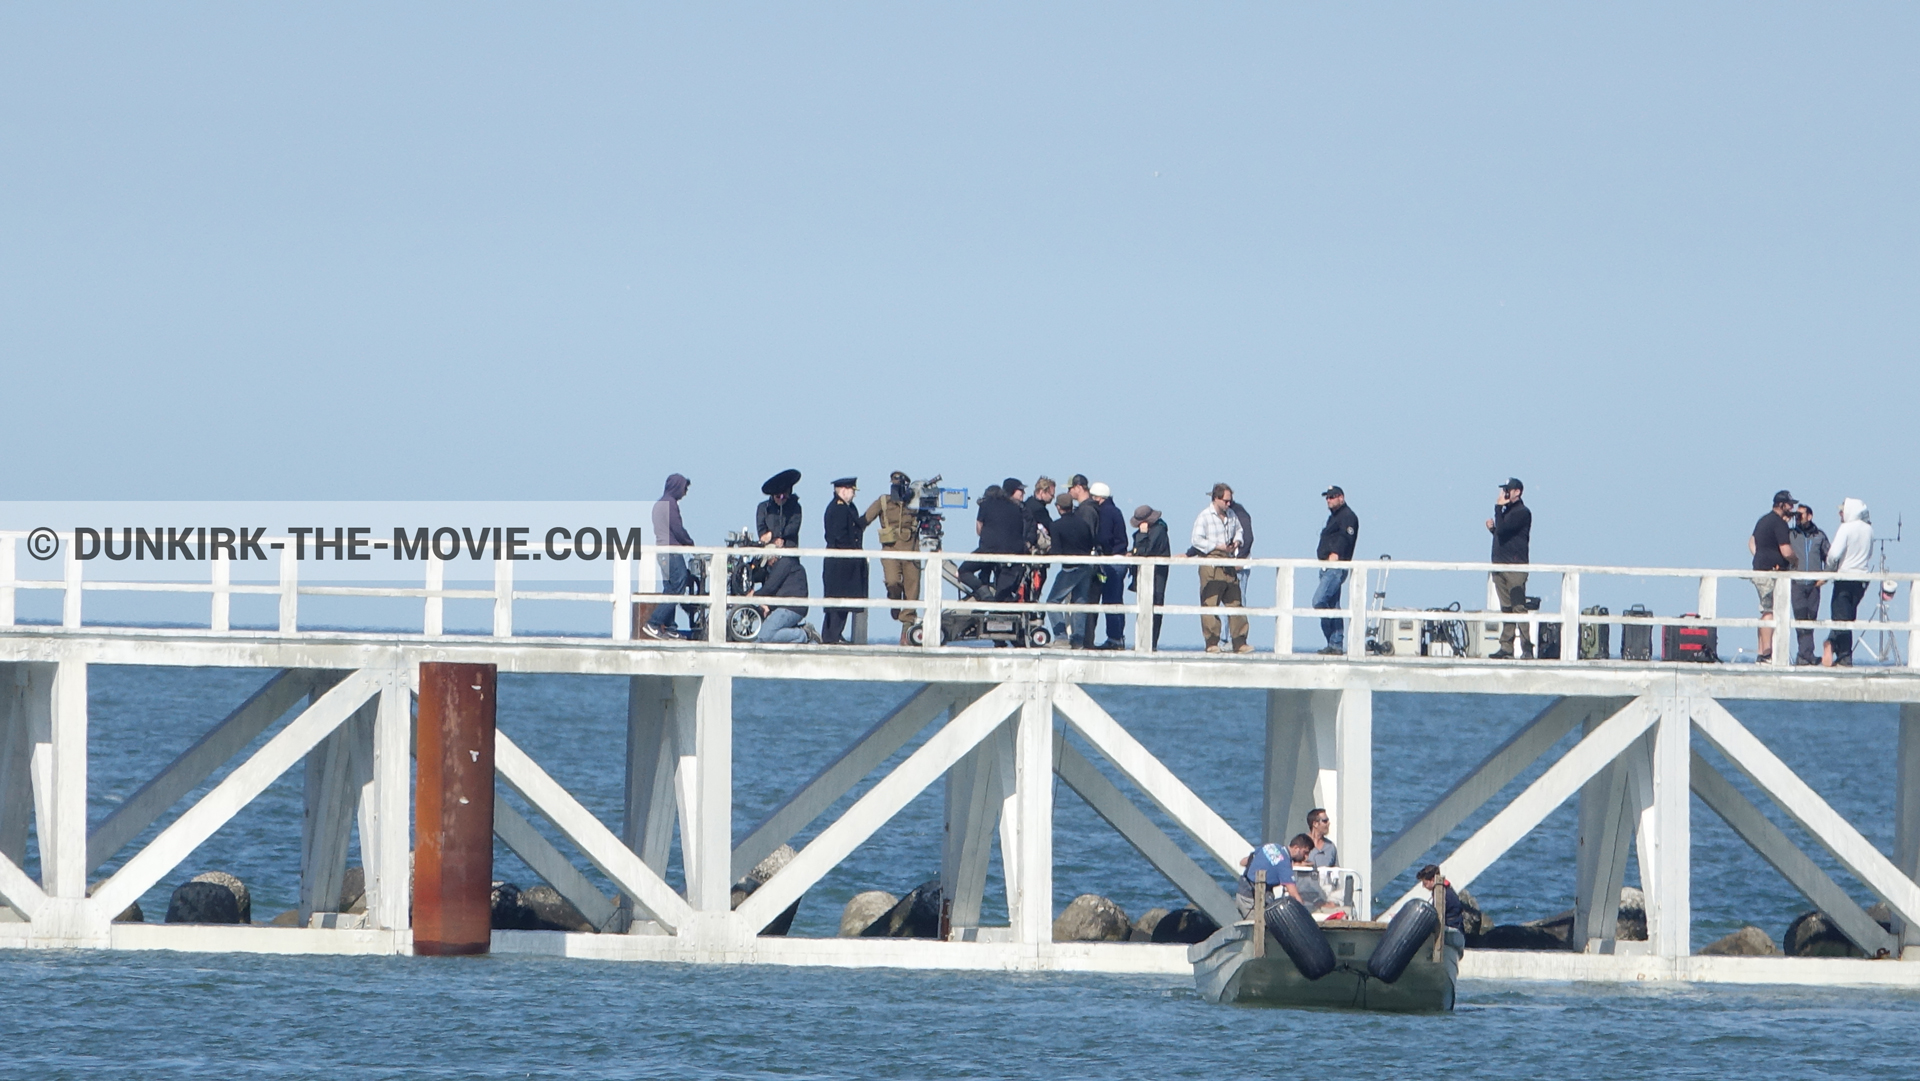 Picture with actor, IMAX camera, blue sky, EST pier, Kenneth Branagh, Christopher Nolan, technical team, inflatable dinghy,  from behind the scene of the Dunkirk movie by Nolan